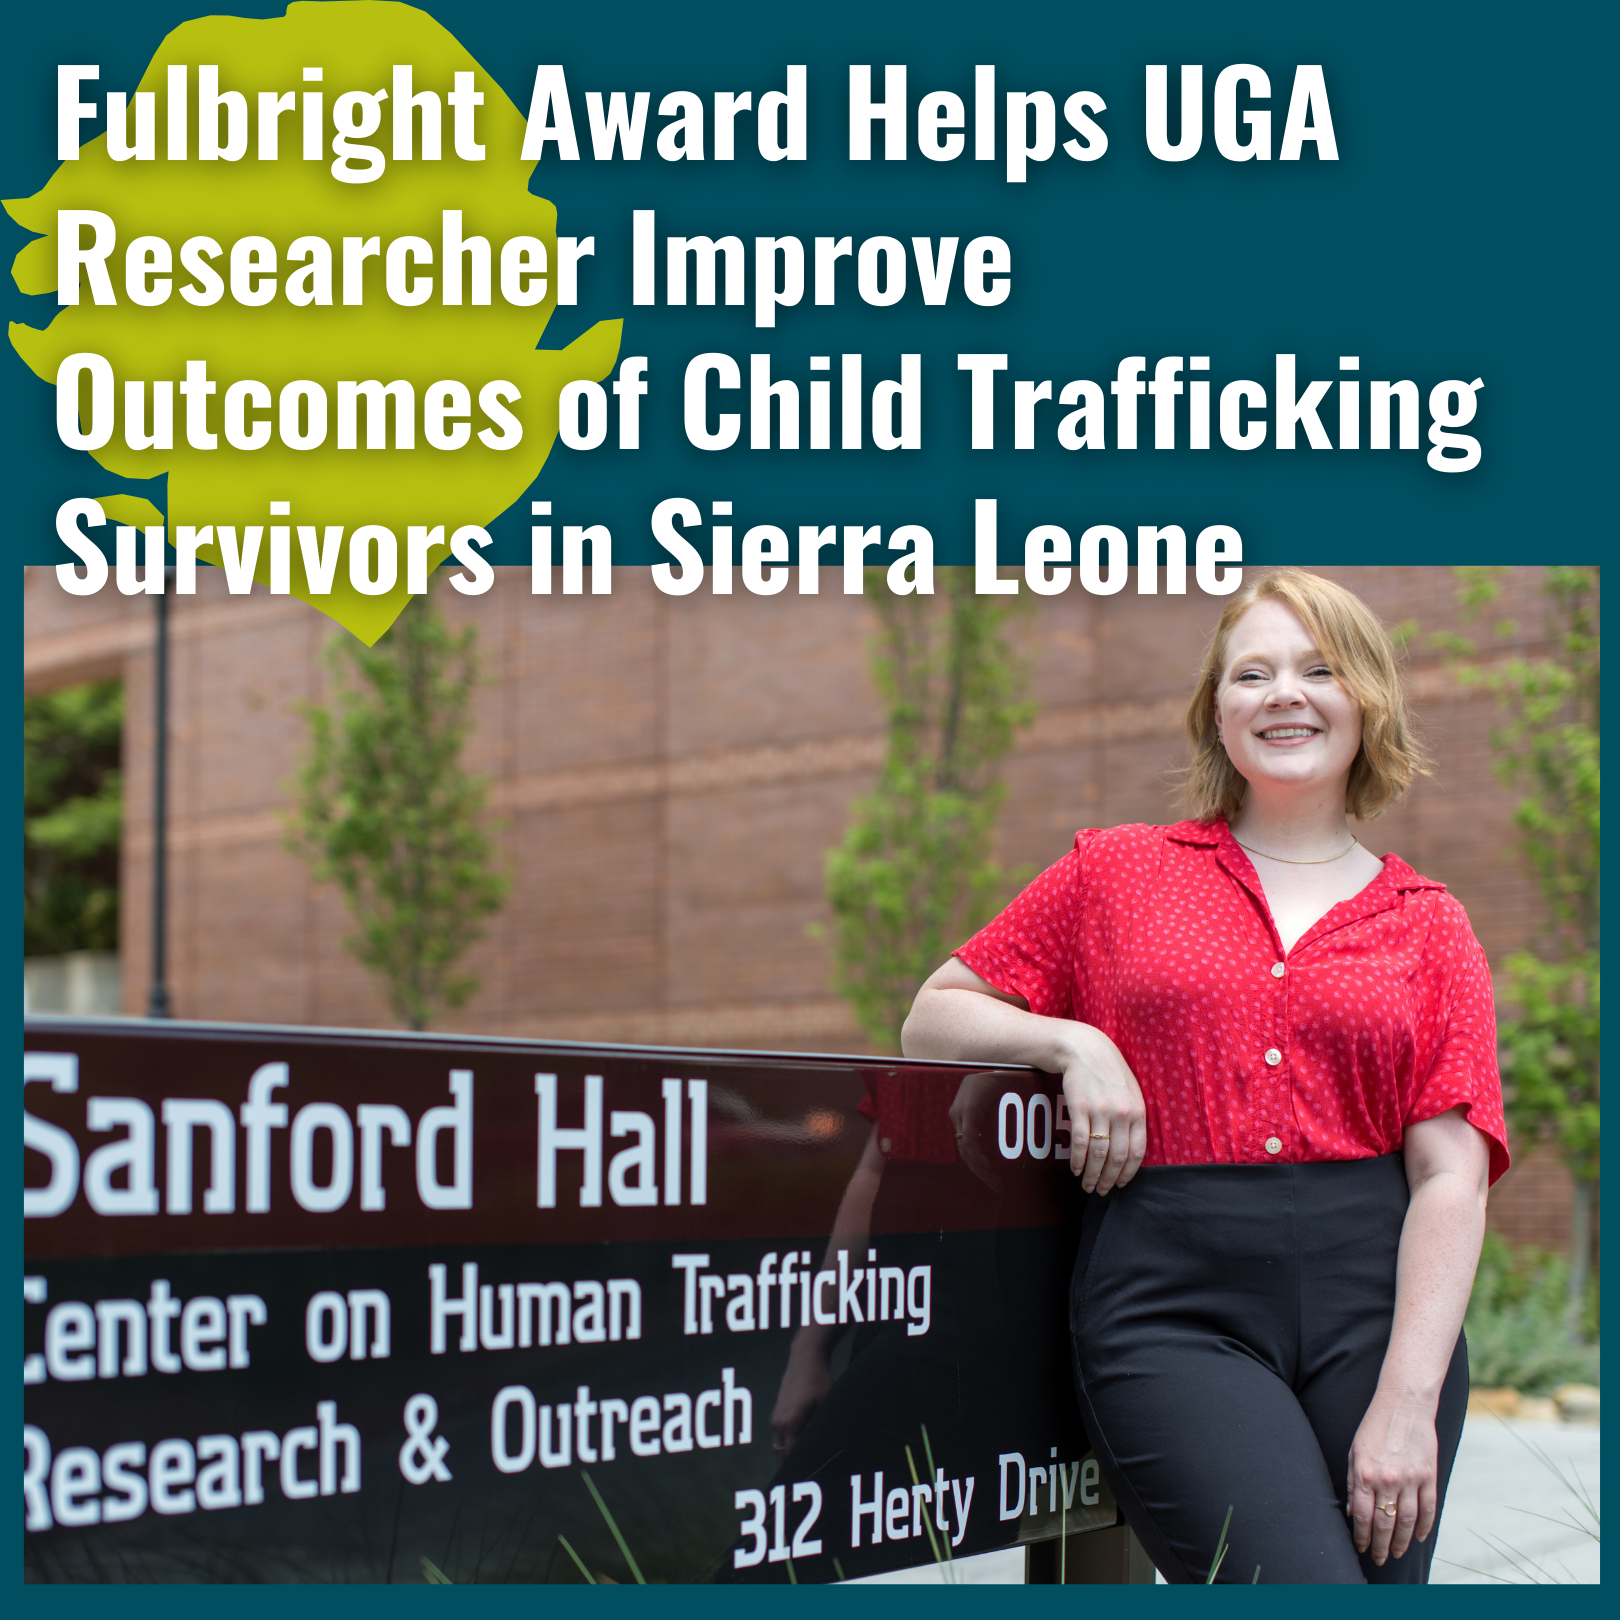 Fulbright Award Helps UGA Researcher Improve Outcomes of Child Trafficking Survivors in Sierra Leone